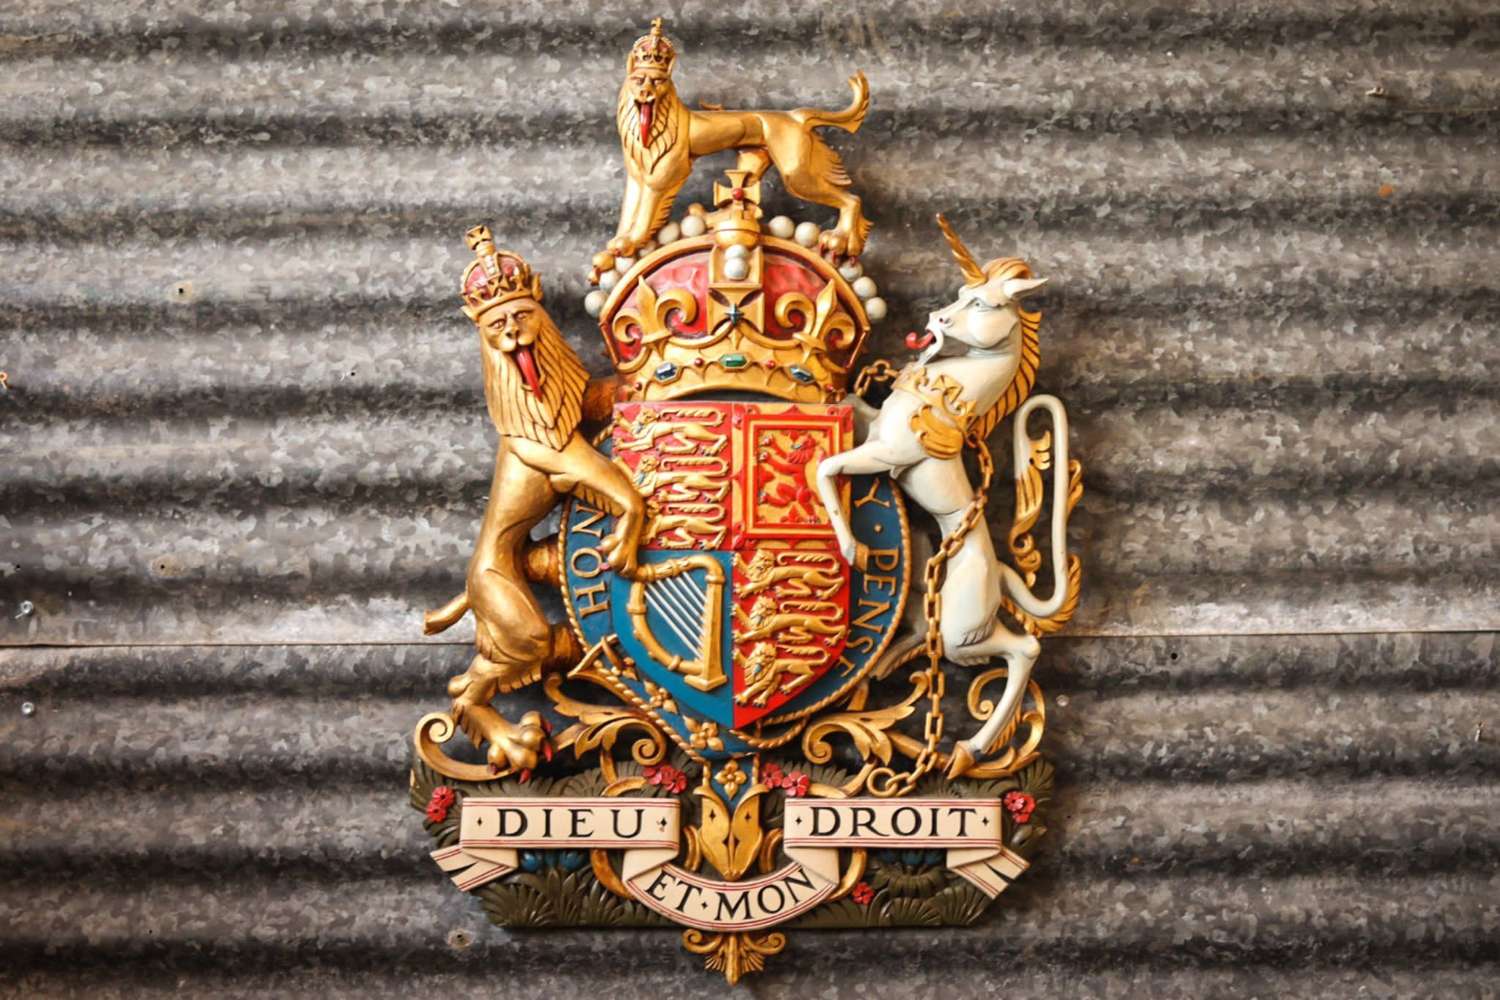 A very special Royal Crest